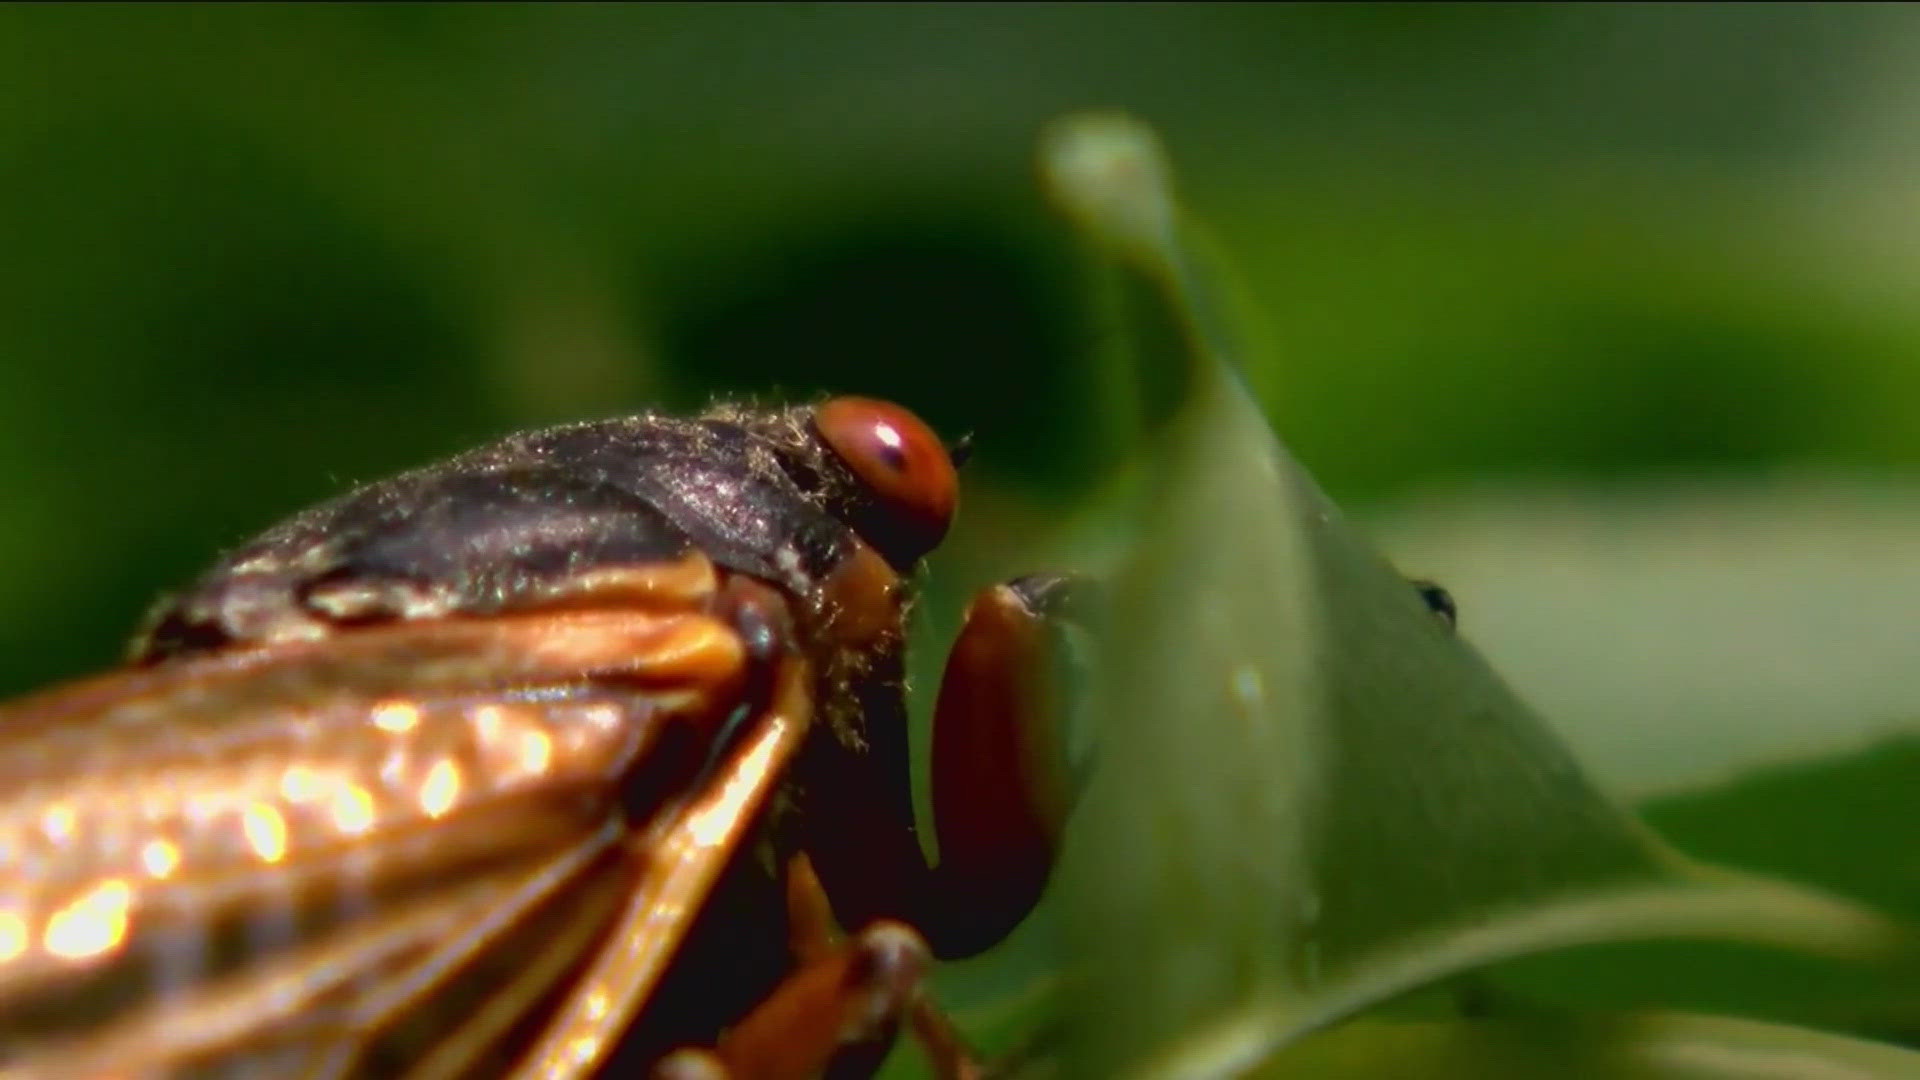 11Alive goes on a cicada safari with a top Georgia entomologist for an update on their life cycle.